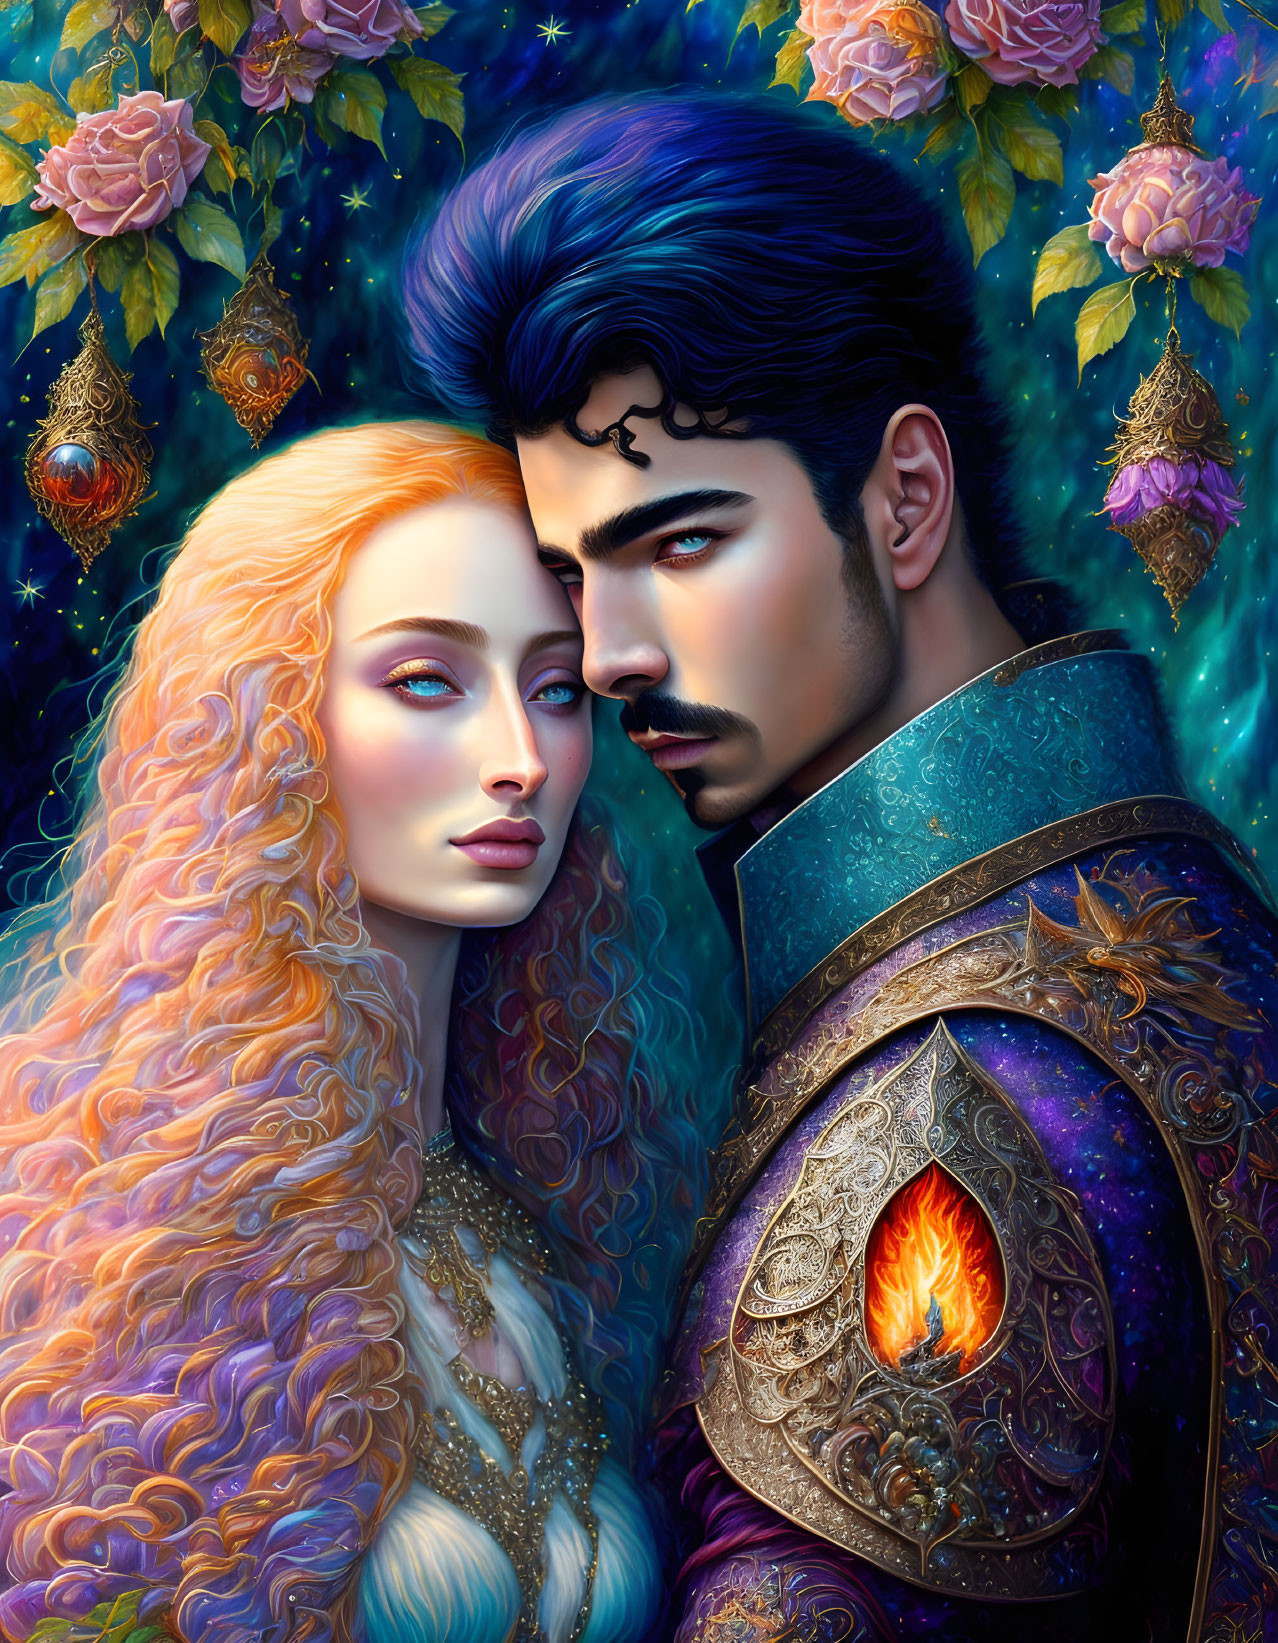 Fantasy-themed illustration of fair-skinned woman and man with detailed attire on starry background.